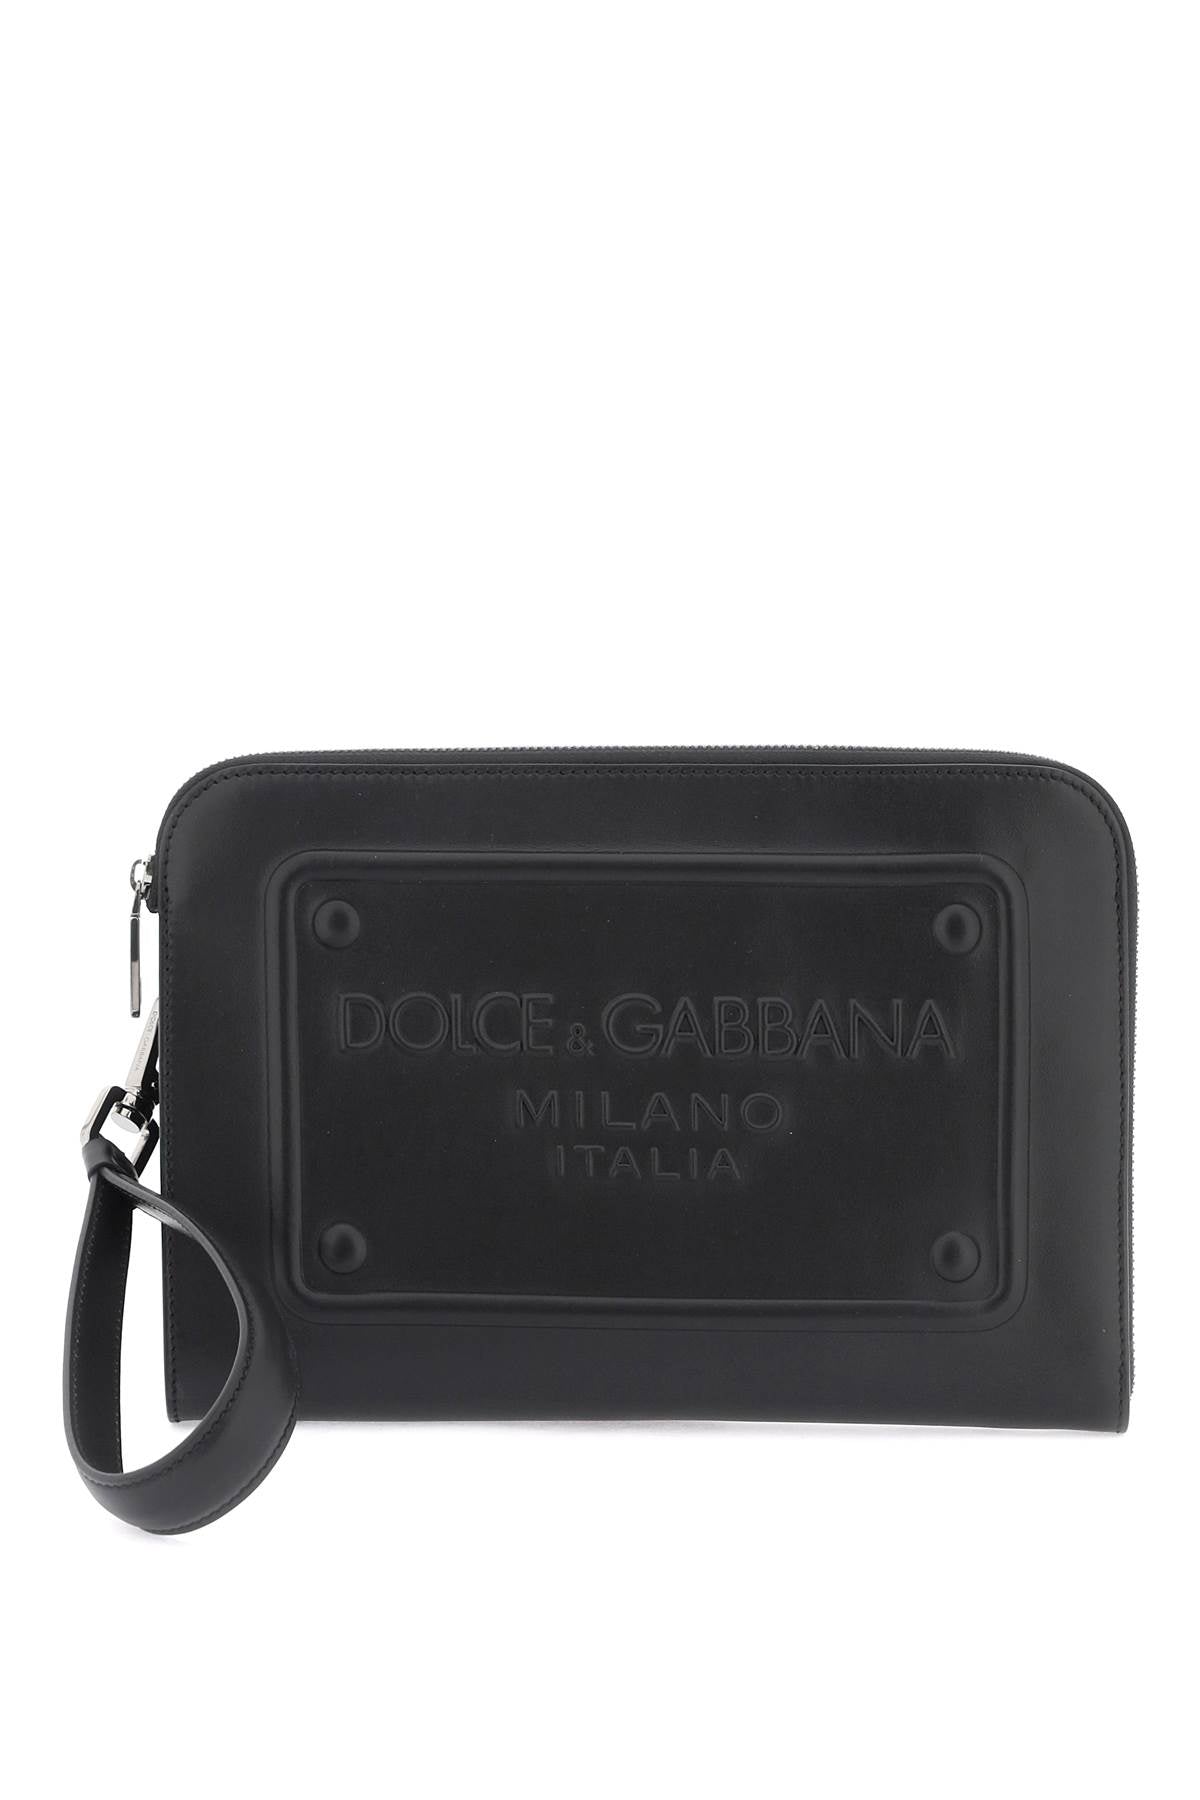 Dolce & gabbana pouch with embossed logo-0